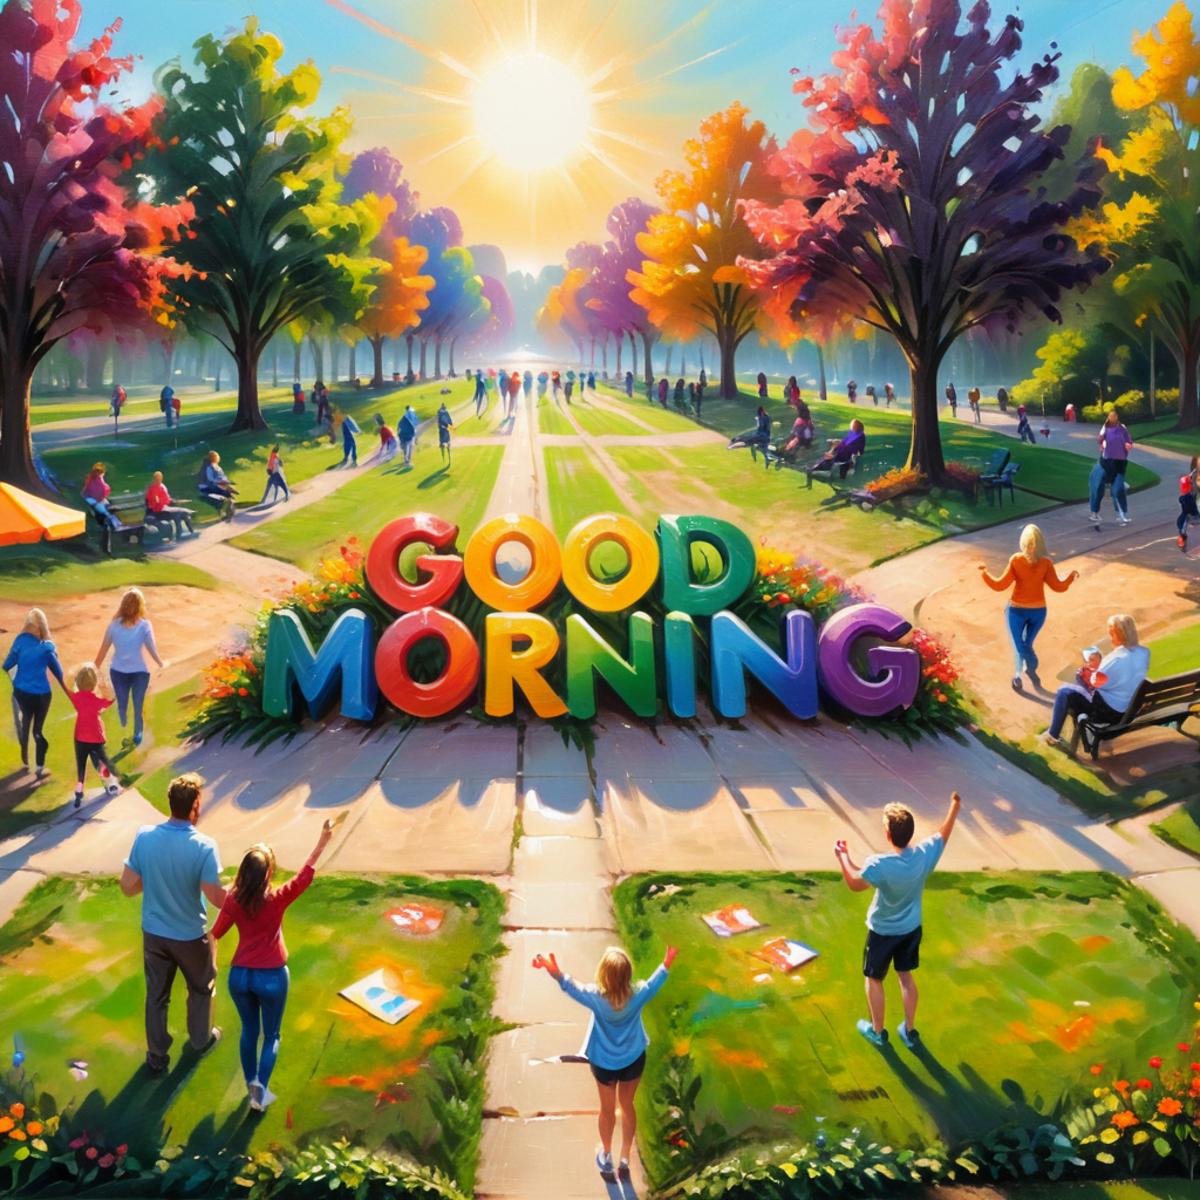 A painting of a park scene with "Good Morning" on a sign.